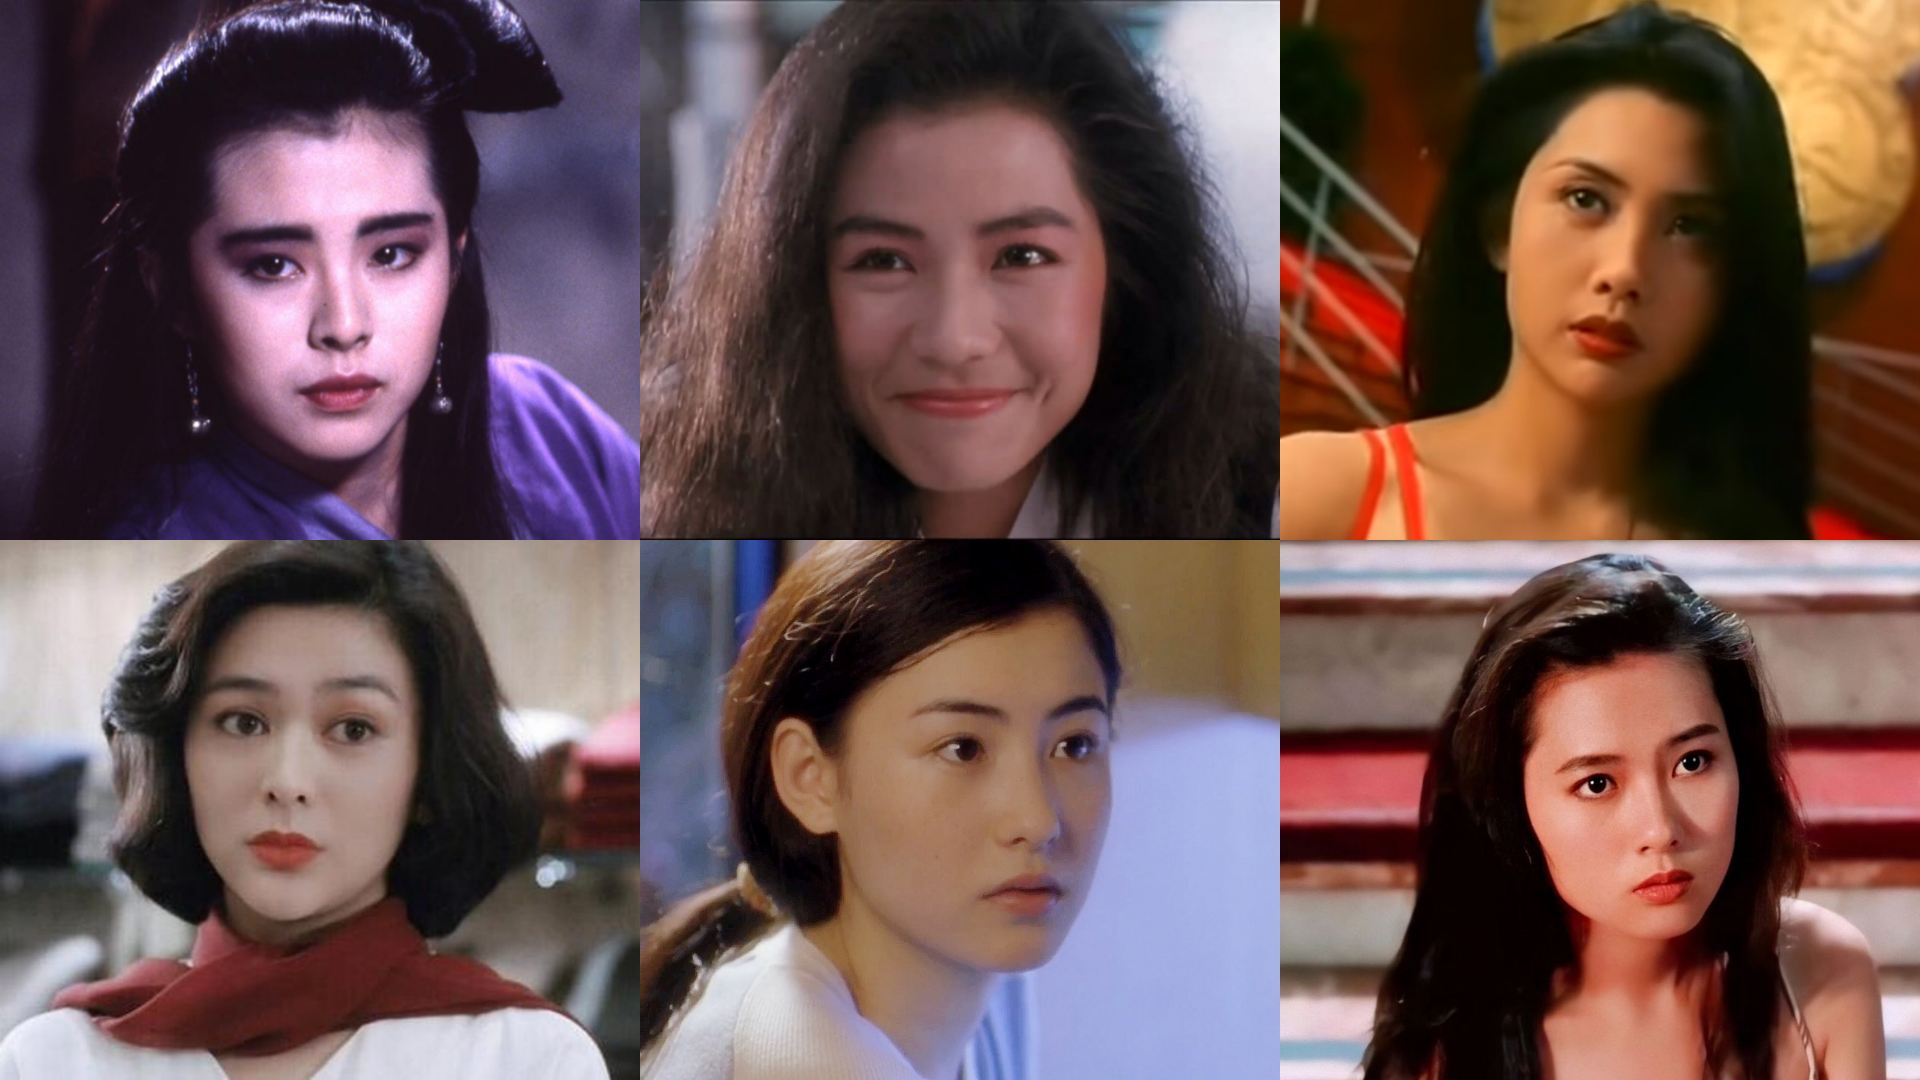 Here Are The Top 15 “hongkong Screen Goddesses” Of The ‘80s And ‘90s According To Netizens 8days